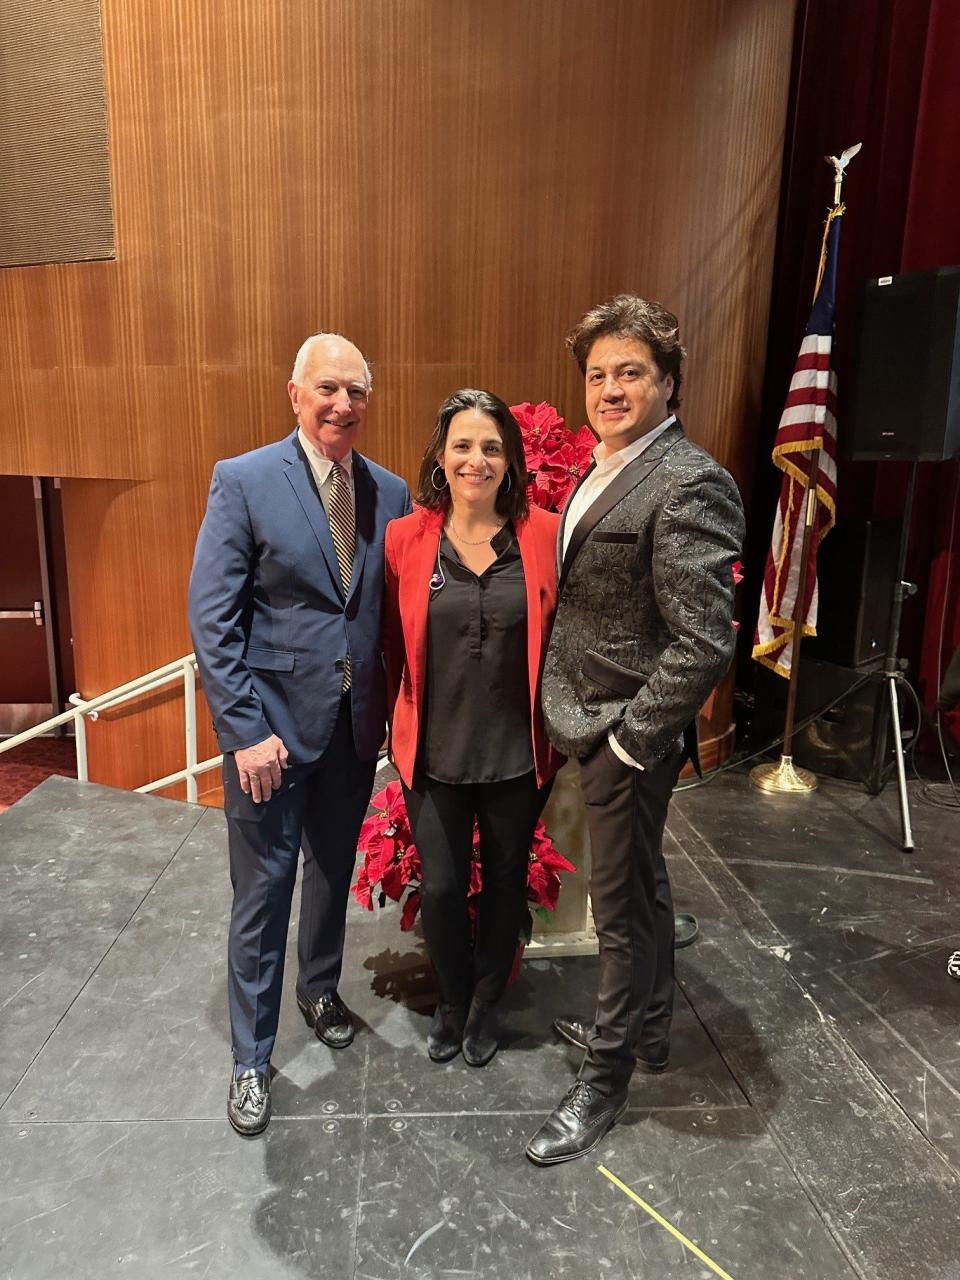 PS Concerts' president Chris Seidel poses with music director-pianist Iliana Rose and tenor Maximo Marcuso at the season opener for PS Concerts, Dec. 3, 2023.